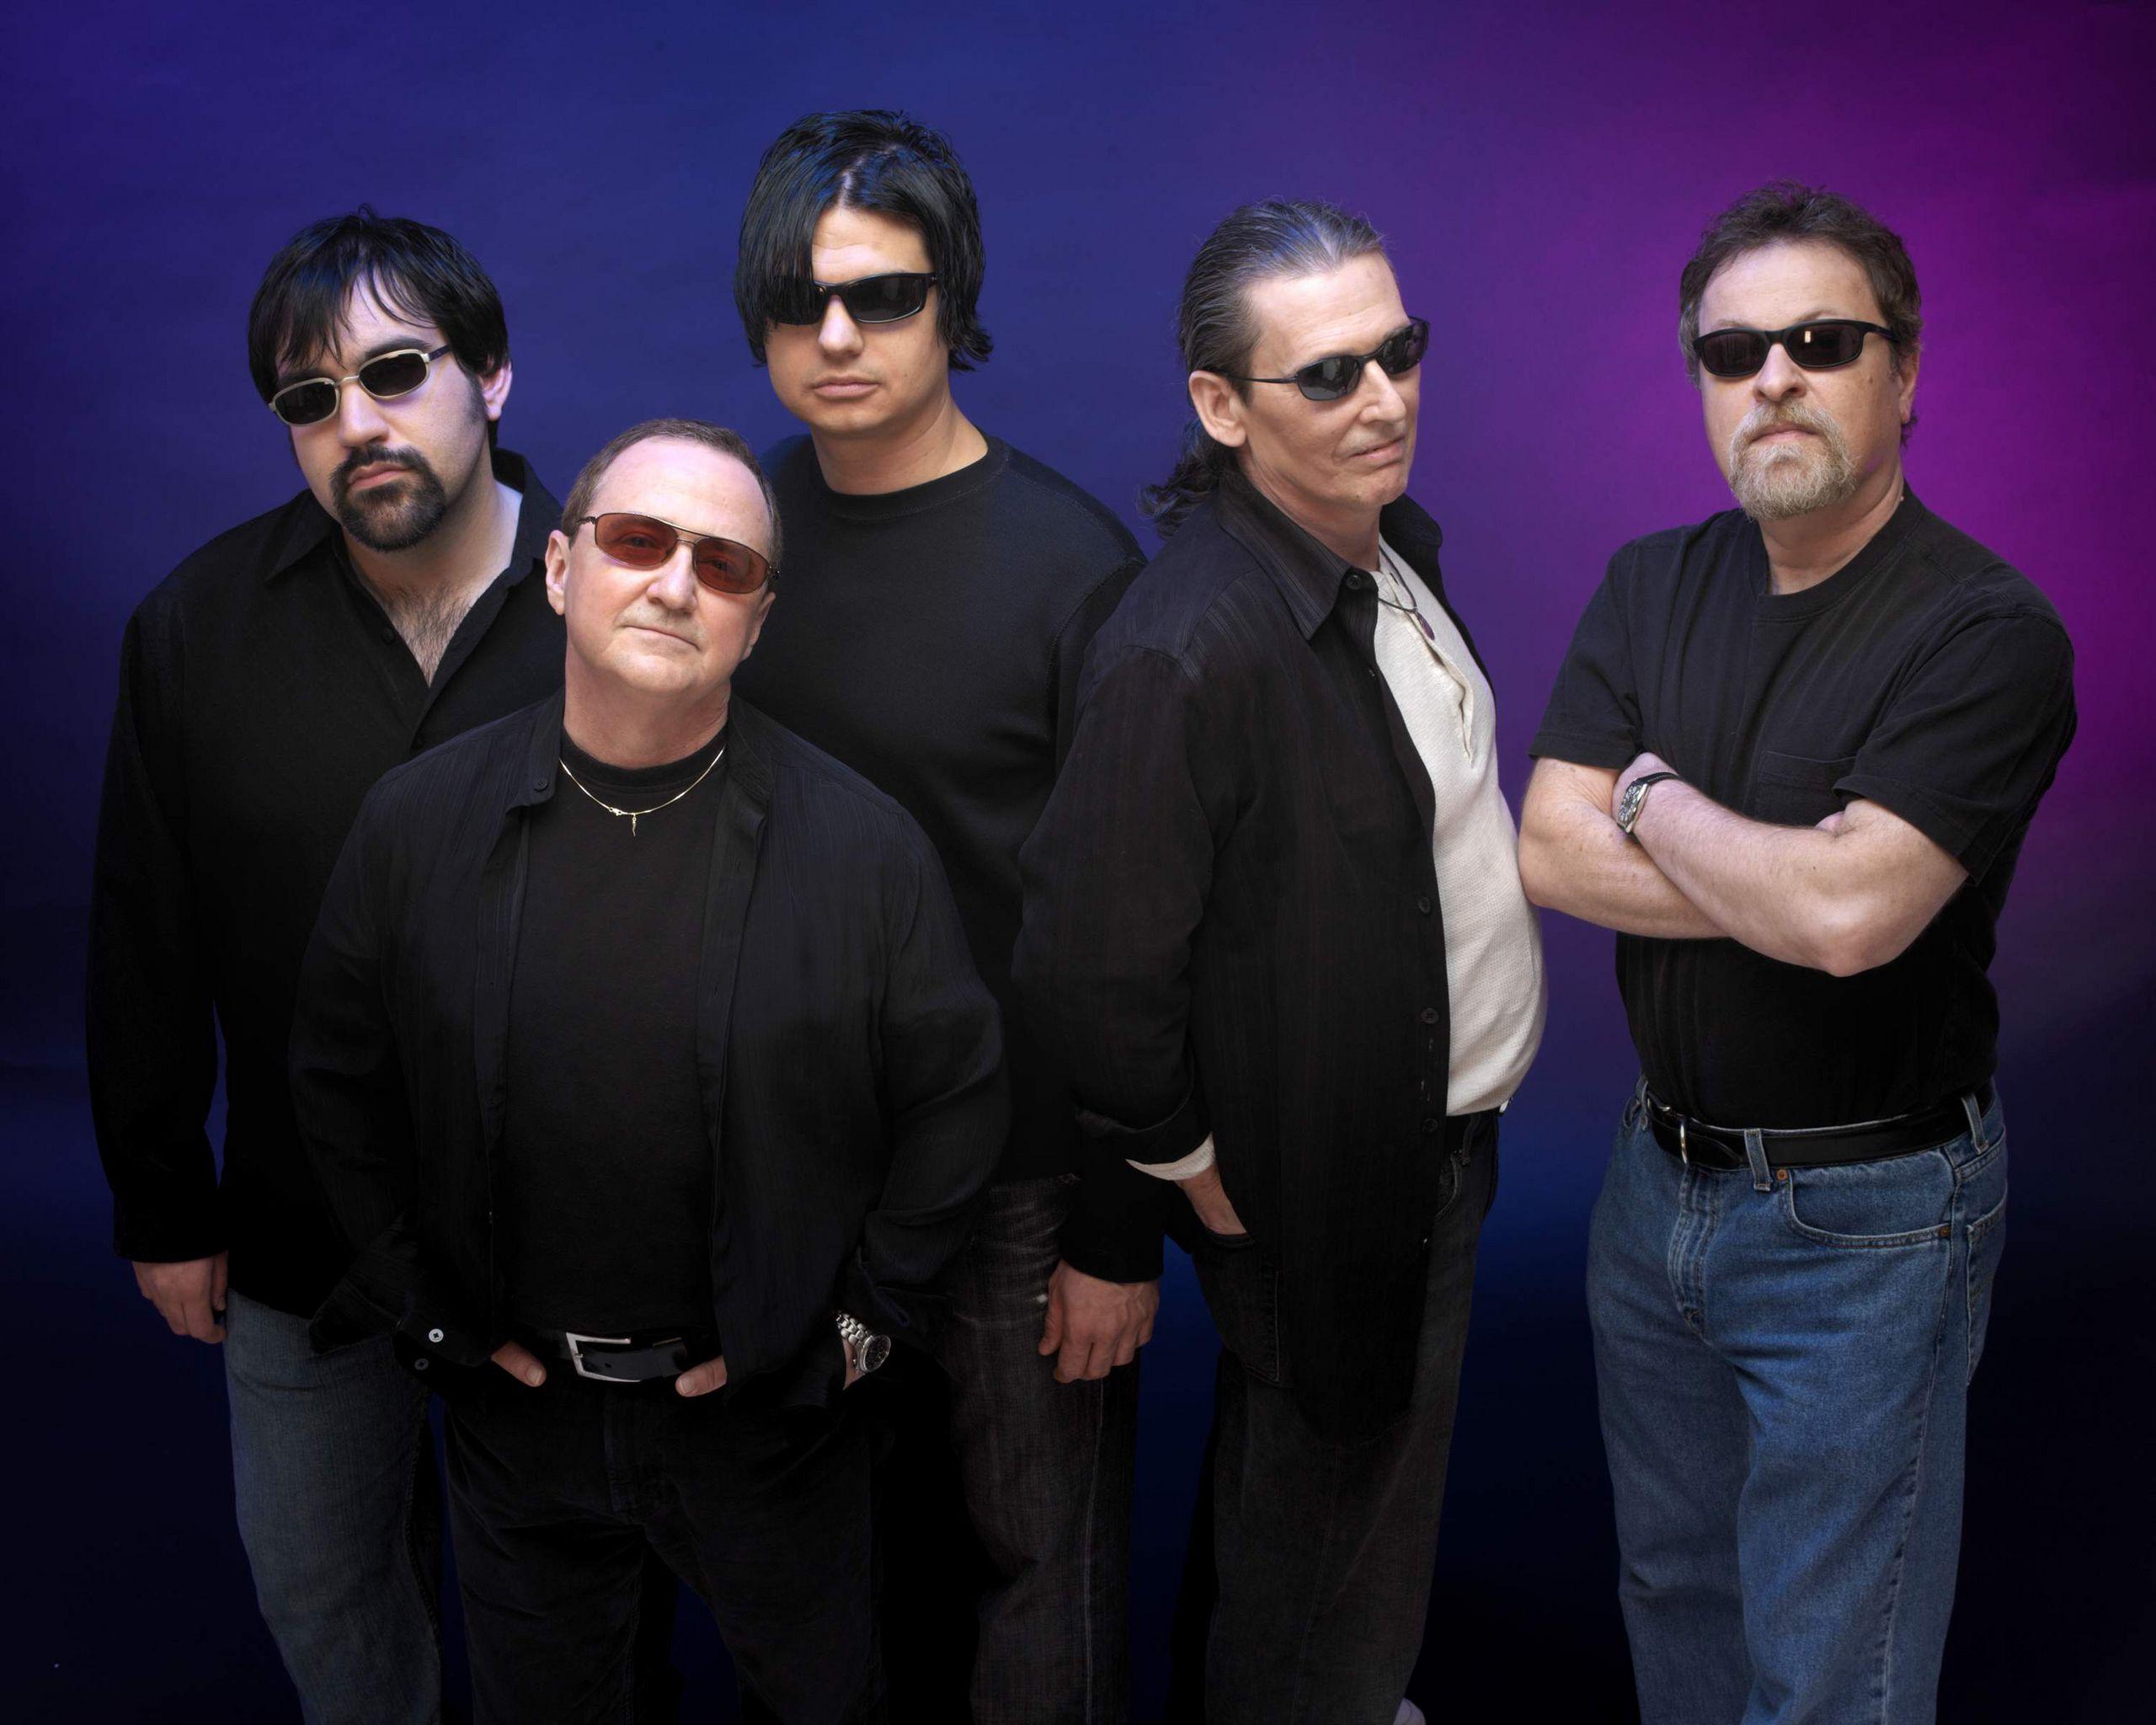 Blue Öyster Cult image B.O.C band HD wallpaper and background